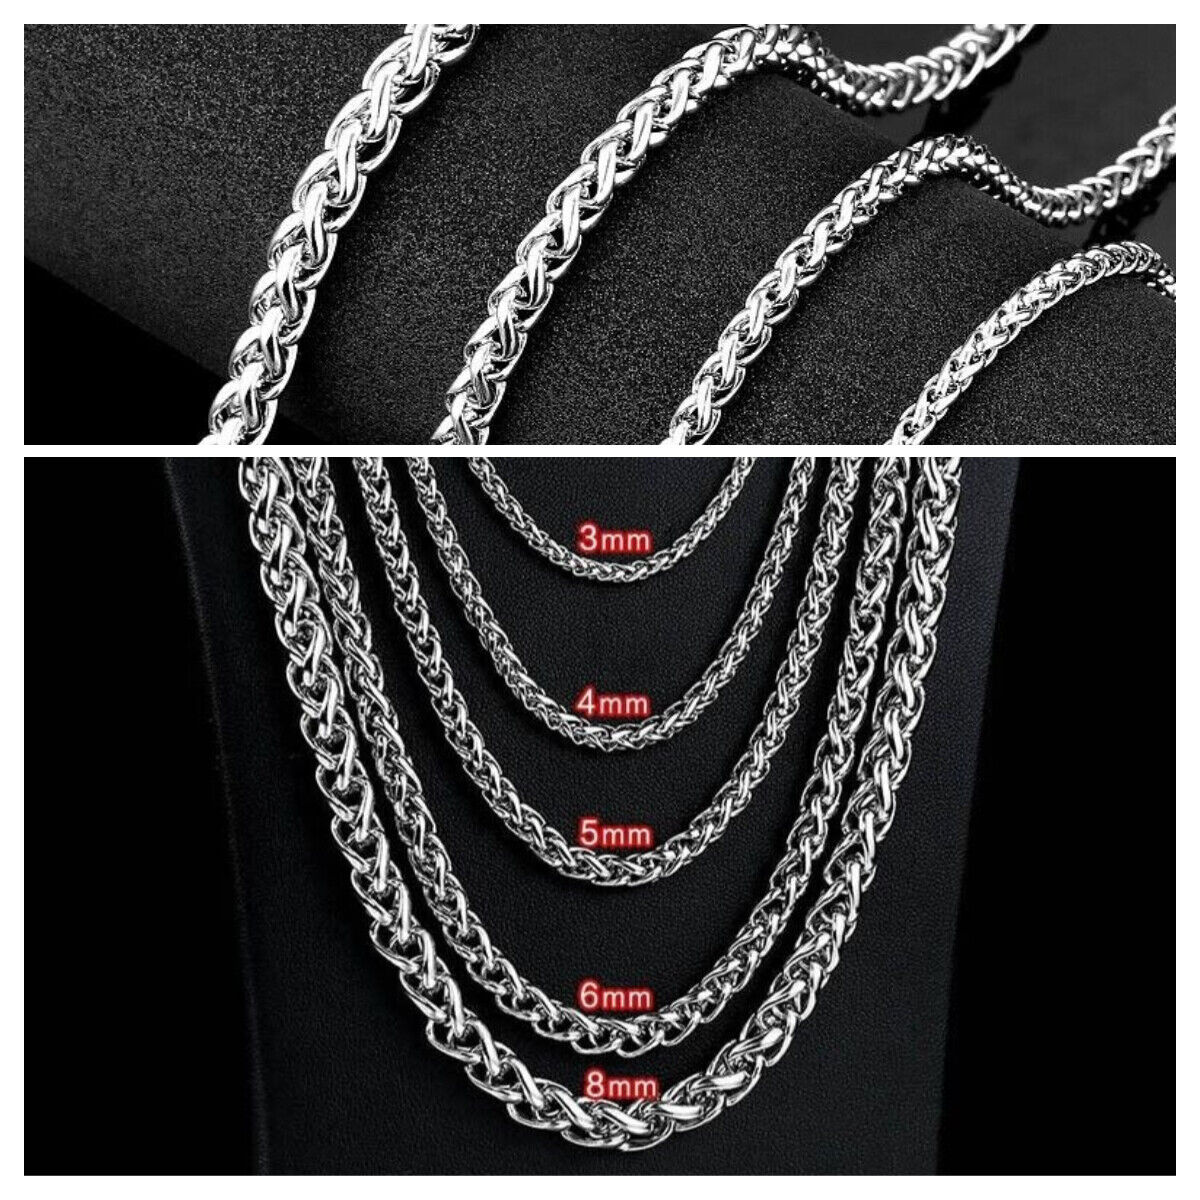 New Men Basic Punk Stainless Steel Wheat Single Link Necklace Women Accessories